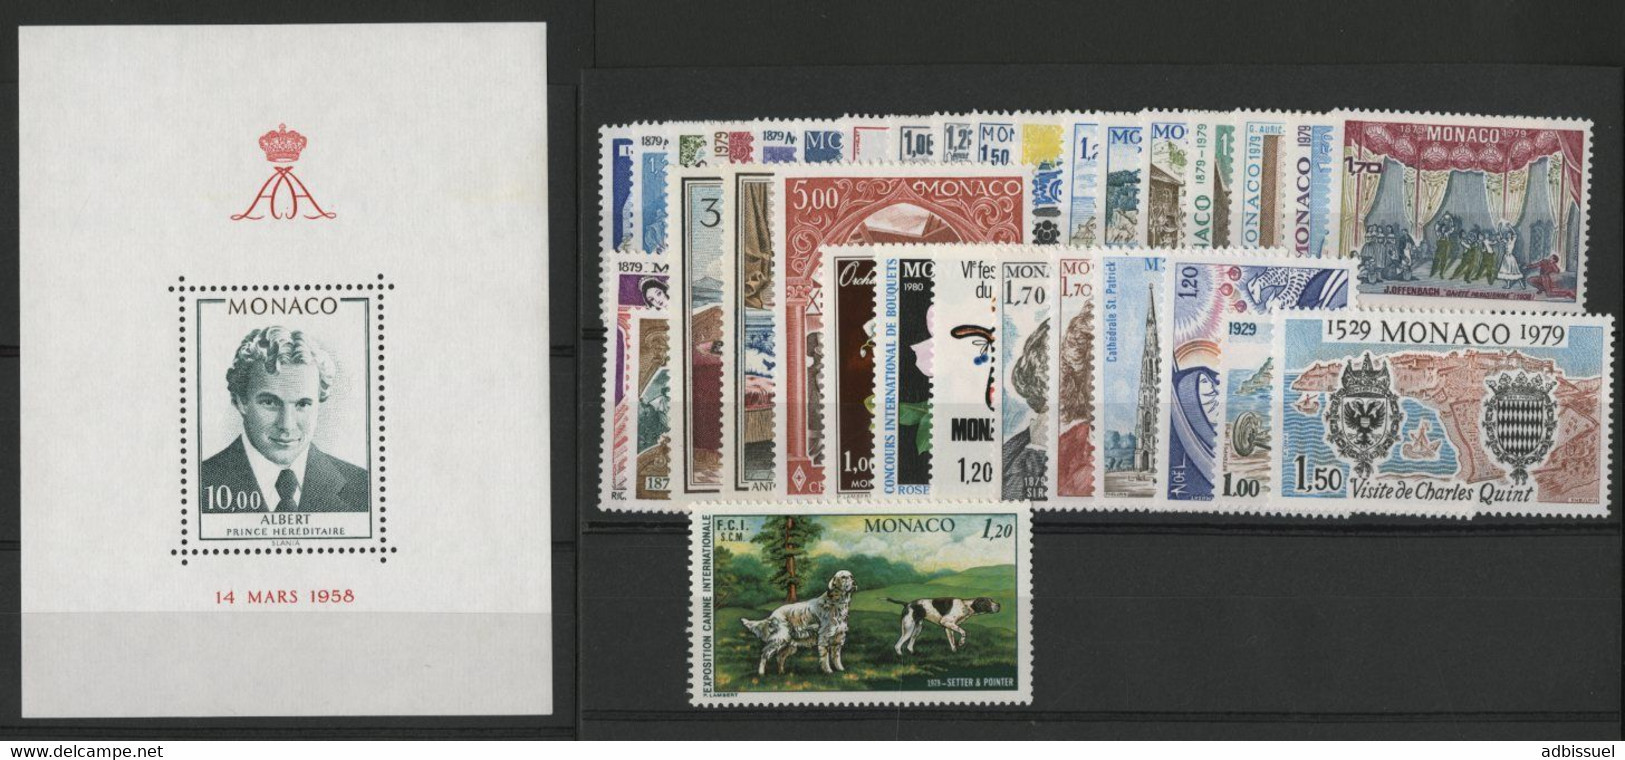 MONACO ANNEE COMPLETE 1979 COTE 88 € NEUFS ** (MNH) N° 1175 à 1208 Soit 34 Timbres. TB - Años Completos